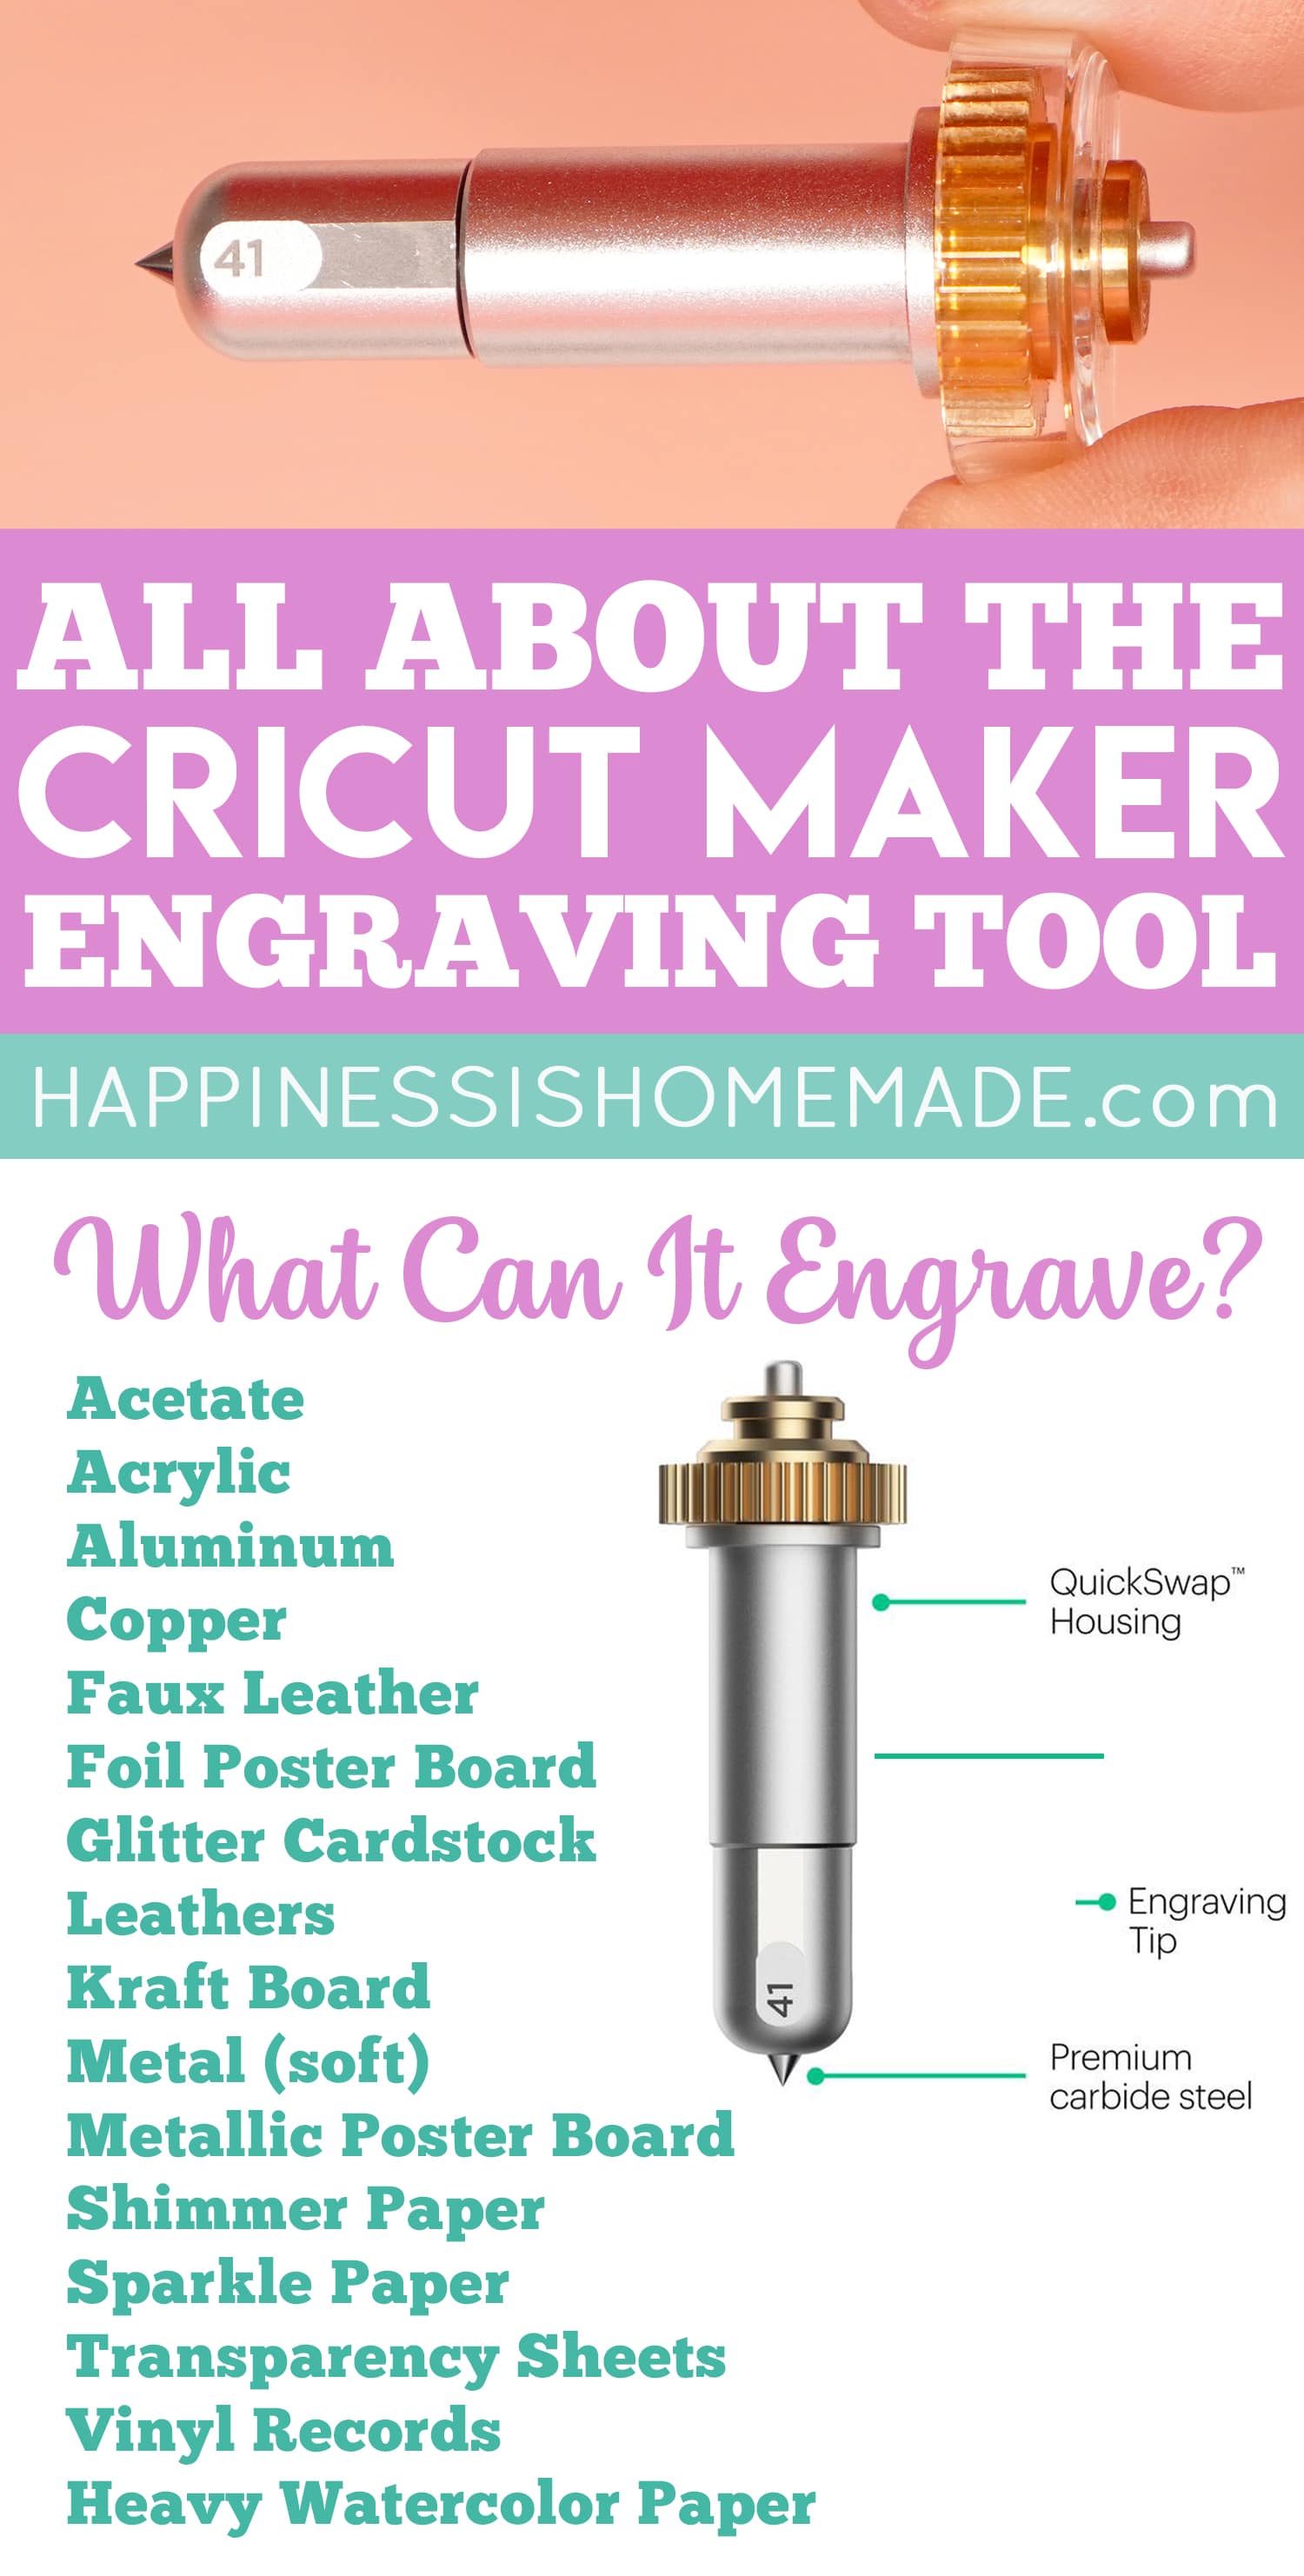 Engraving with Cricut - everything you need to know - Cricut UK Blog